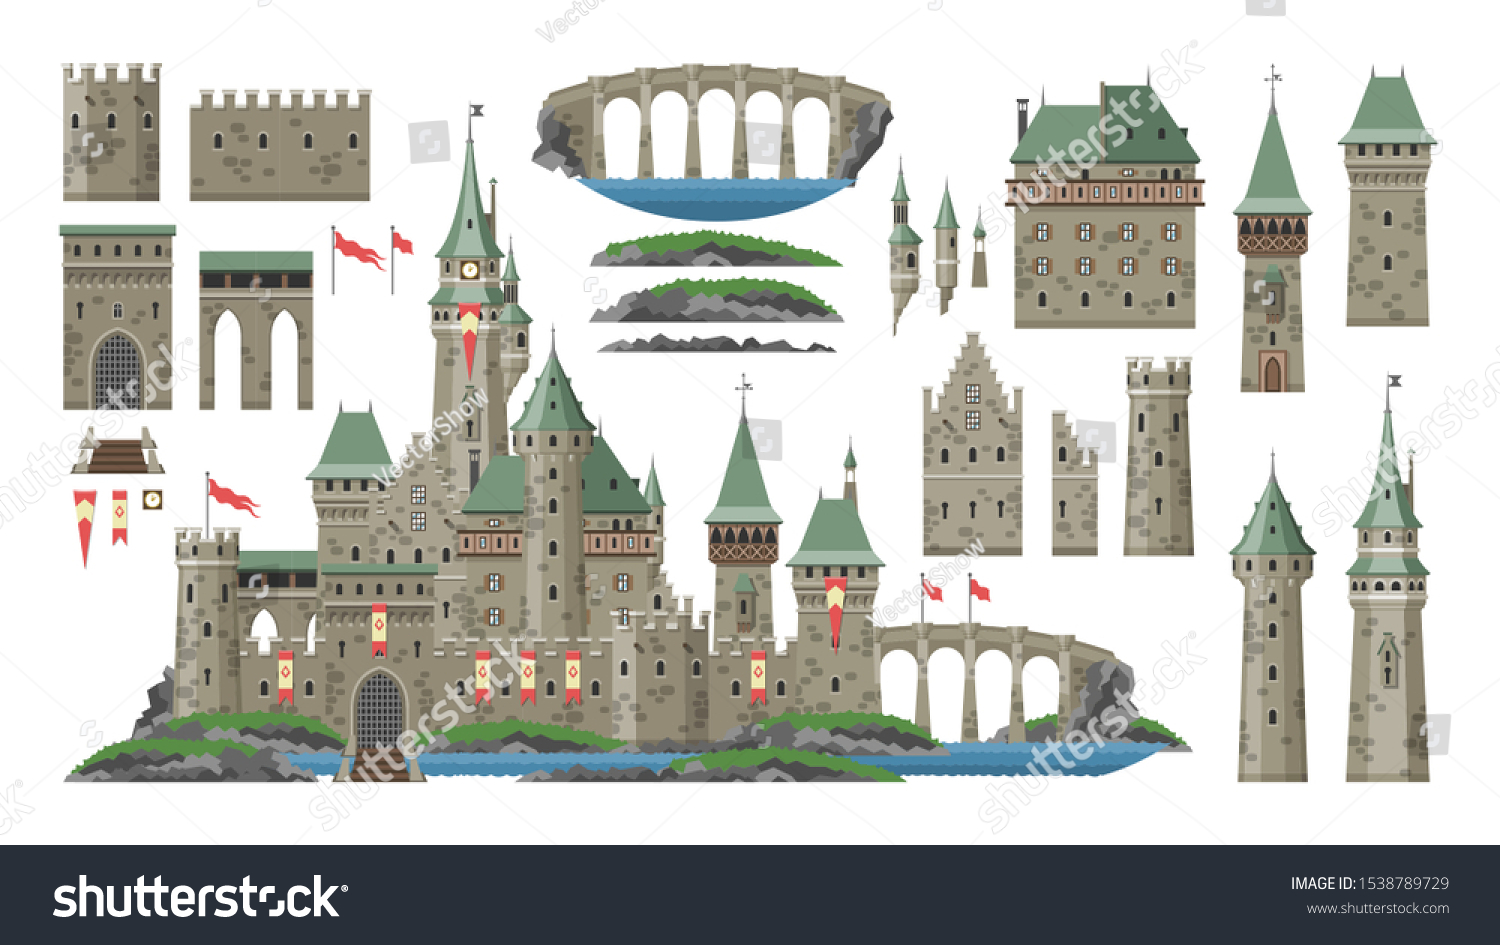 SVG of Cartoon castle vector fairytale medieval tower of fantasy palace building in kingdom fairyland illustration. Set of historical fairy-tale house bastion constructor isolated on white background. svg